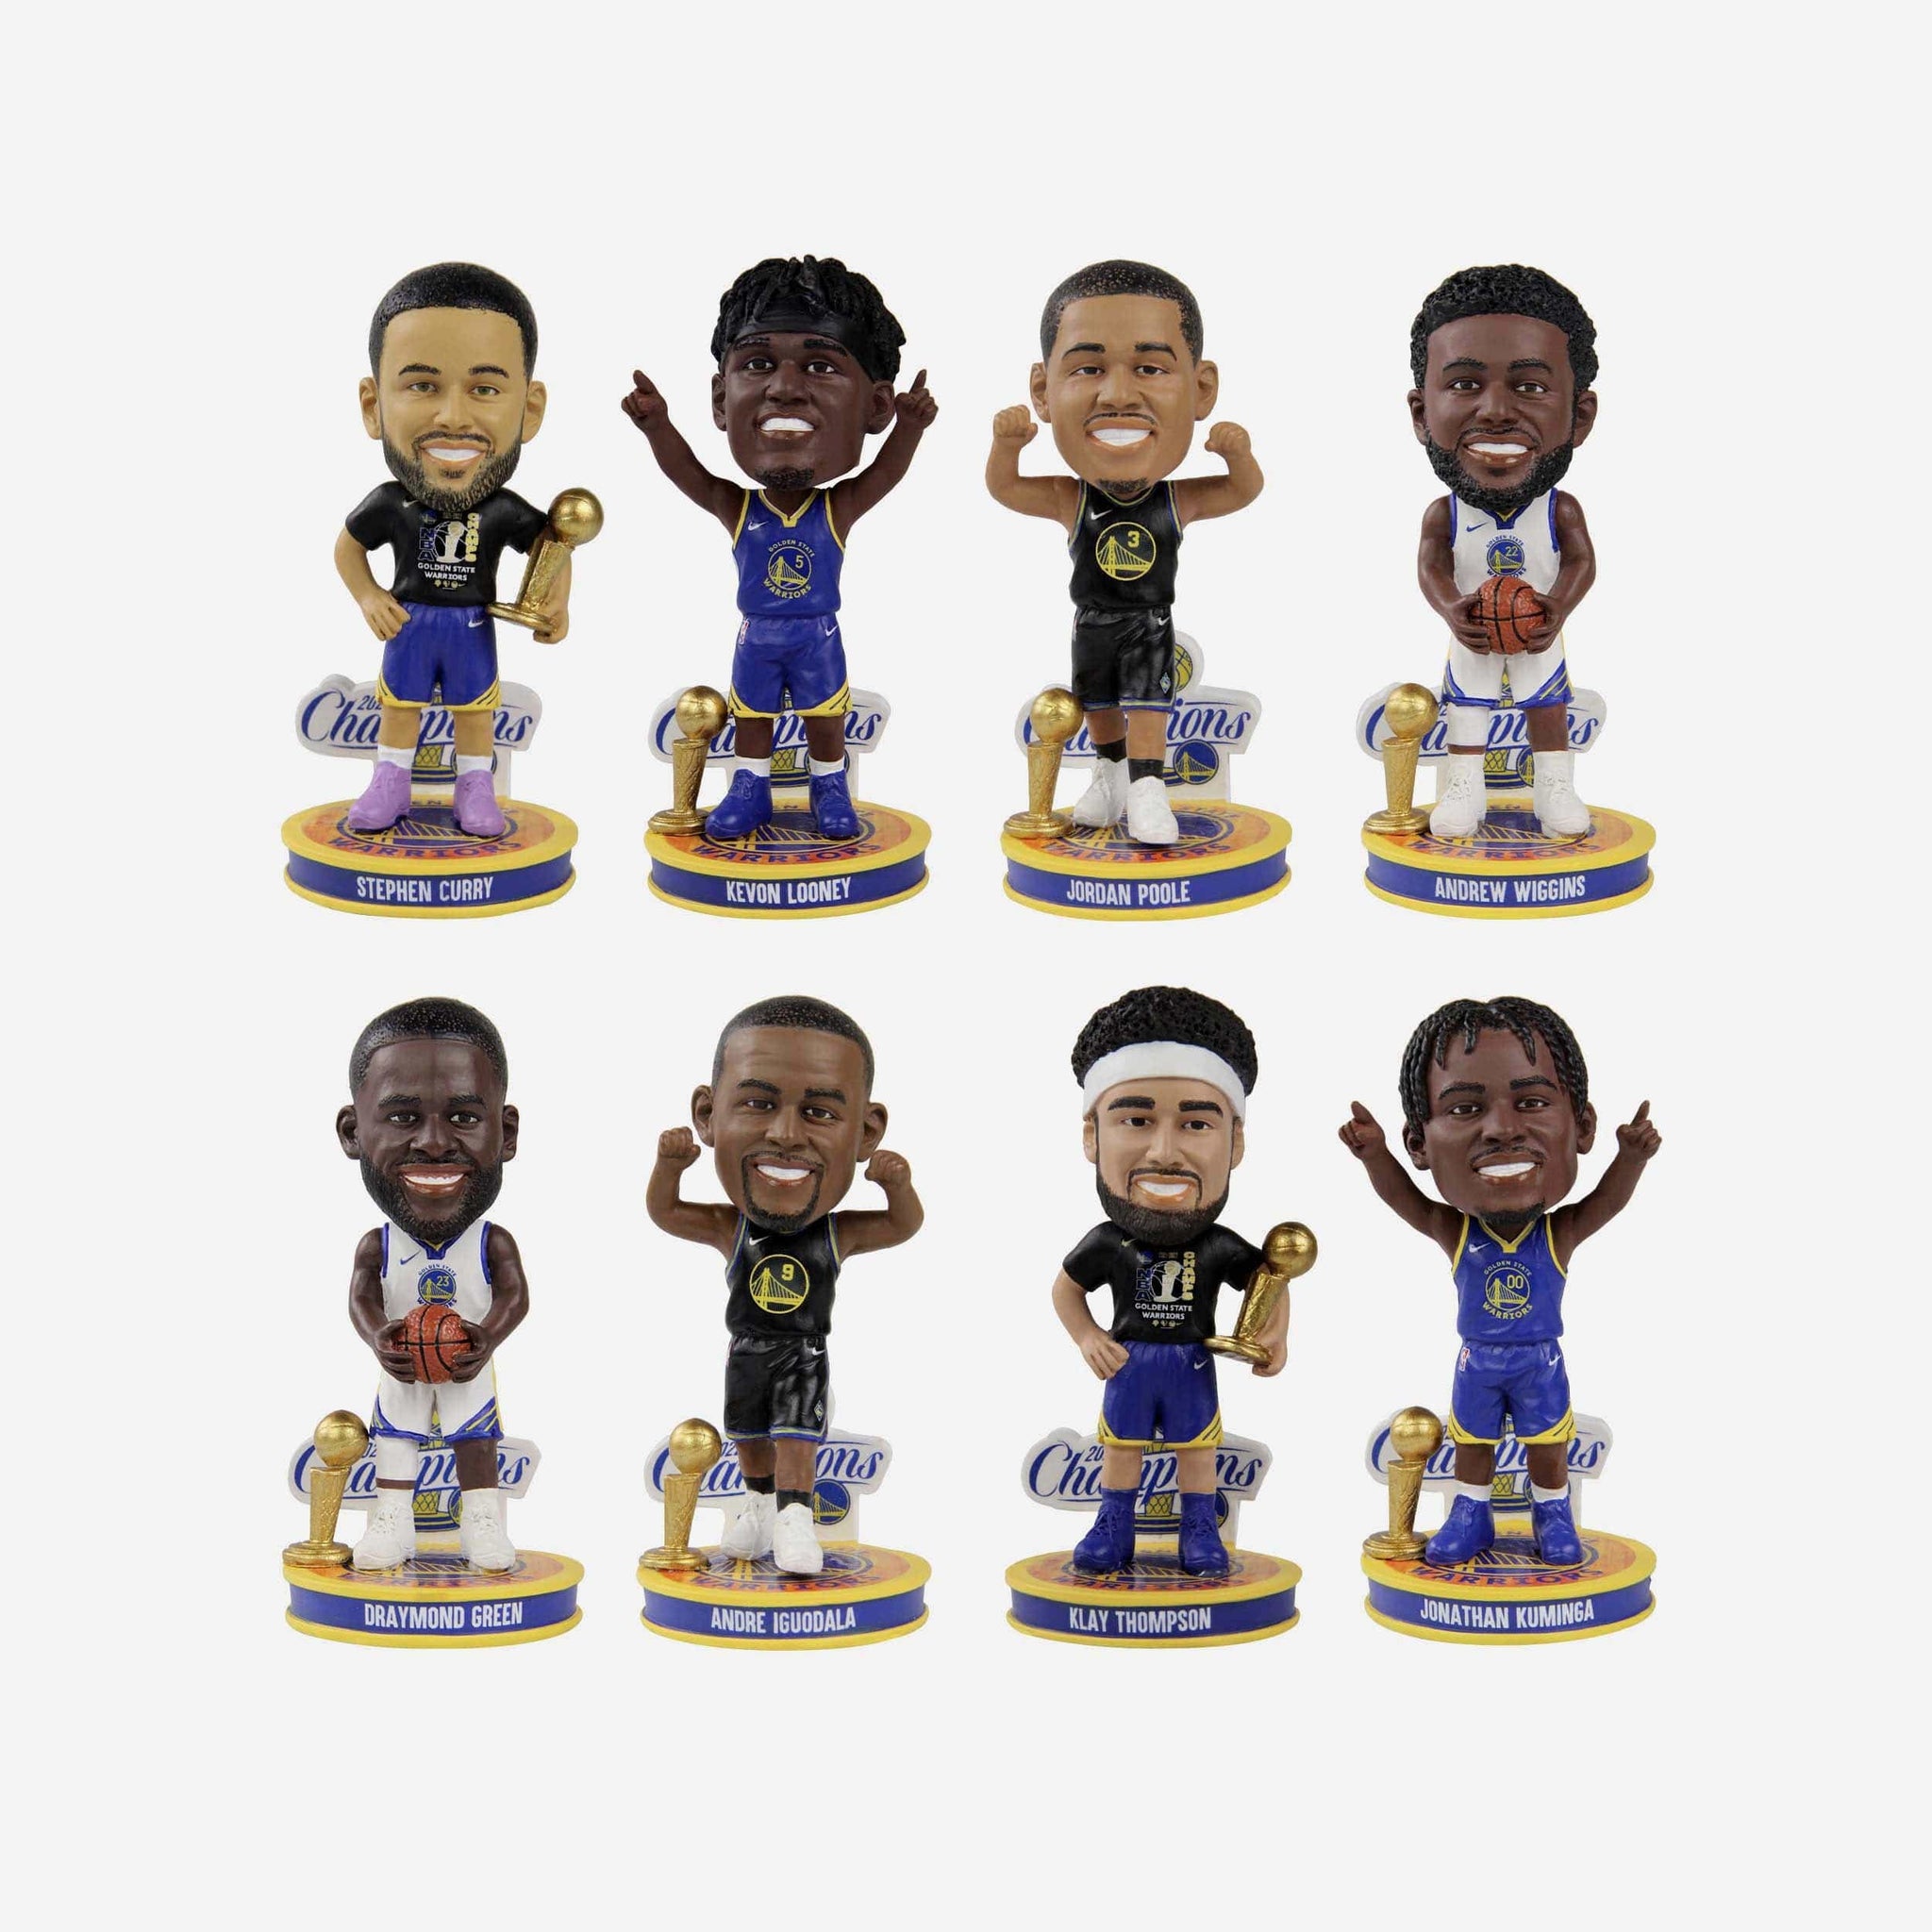 Klay Thompson The Bay Statement Edition – Jersey Crate